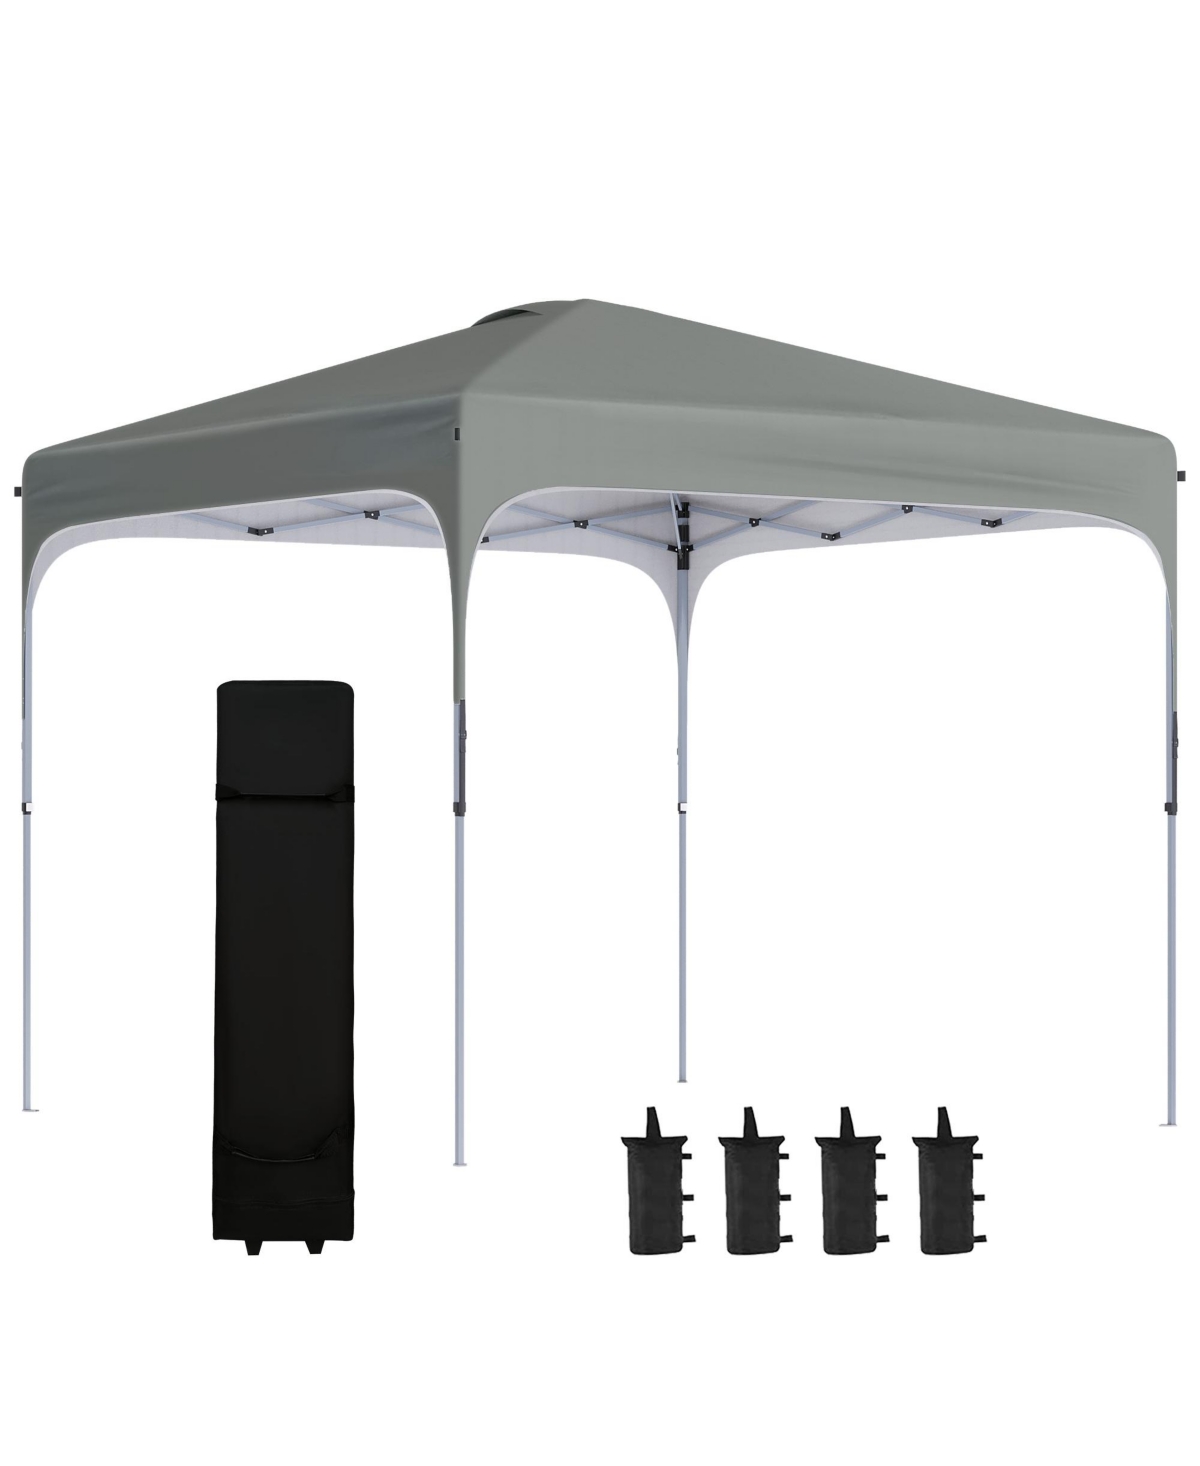 10' x 10' Pop Up Canopy with Adjustable Height, Foldable Gazebo Tent with Carry Bag with Wheels and 4 Leg Weight Bags for Outdoor Garden Pati